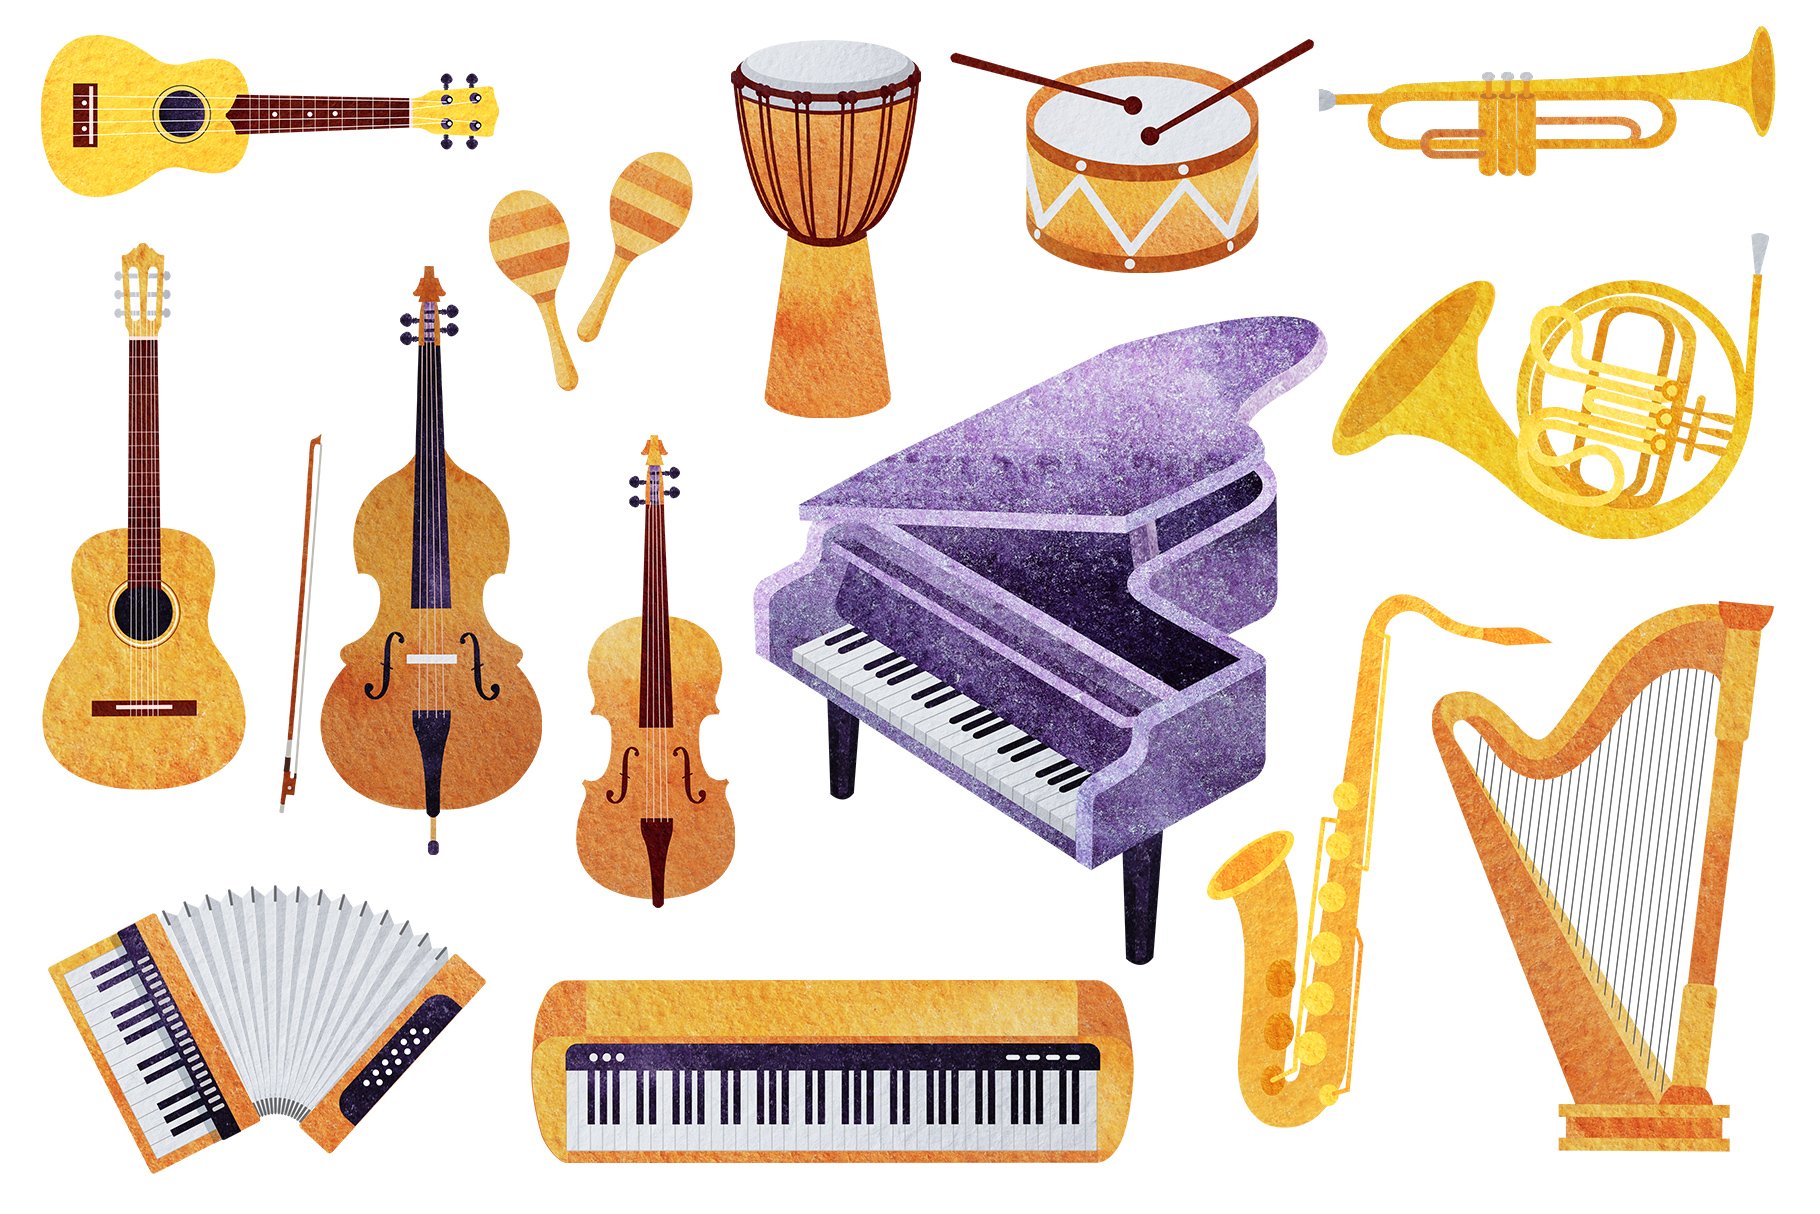 High quality music instruments collection.